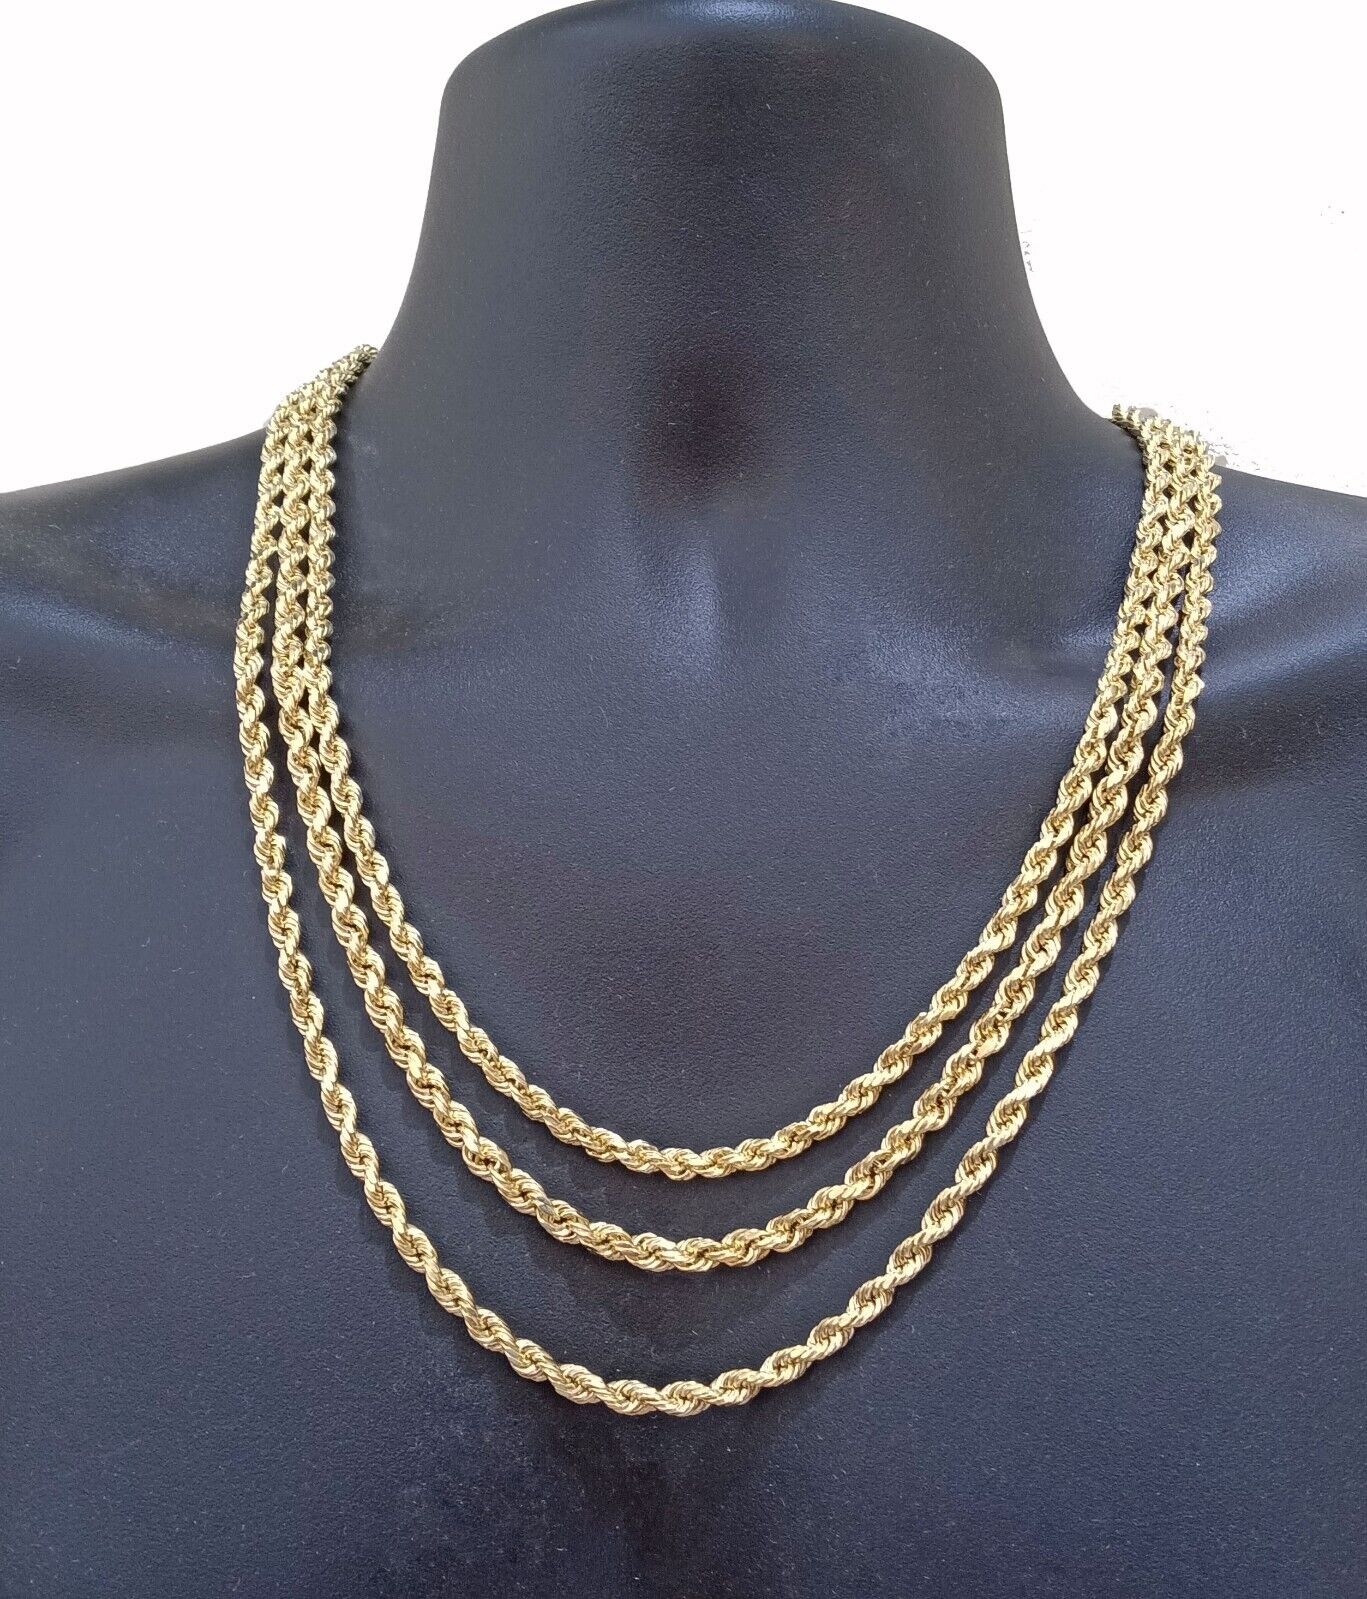 U7 Men's Chain Necklace 22 inches 3Mm Wide 18K-Gold-Plated : Amazon.in:  Jewellery